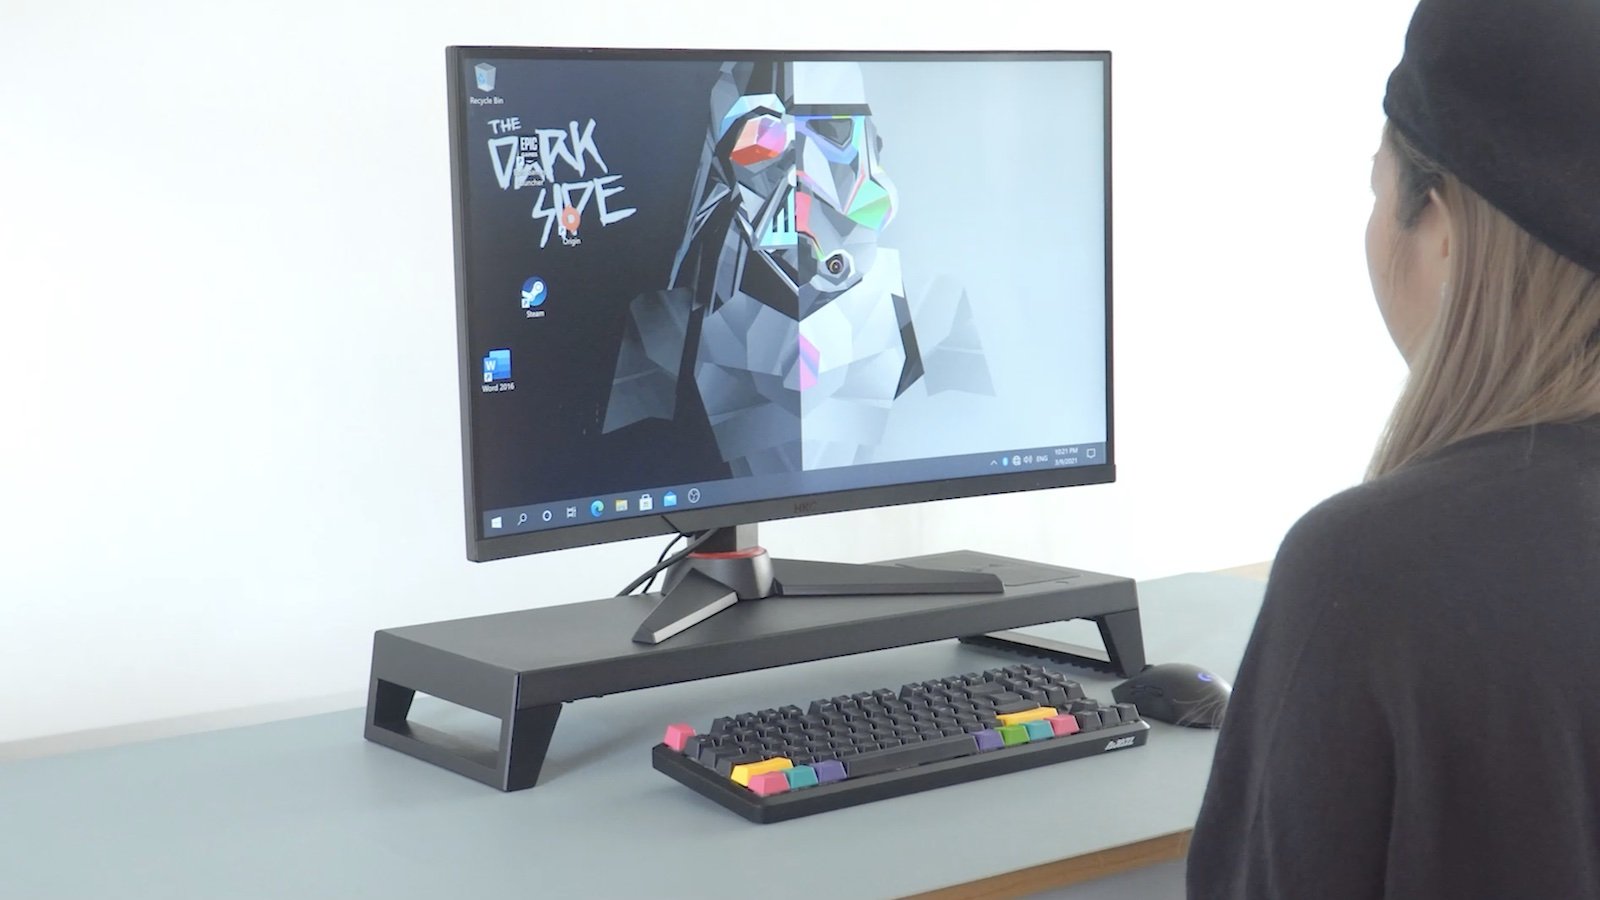 LANQ PCDock Pro PC monitor stand has a fingerprint module that works with Windows Hello